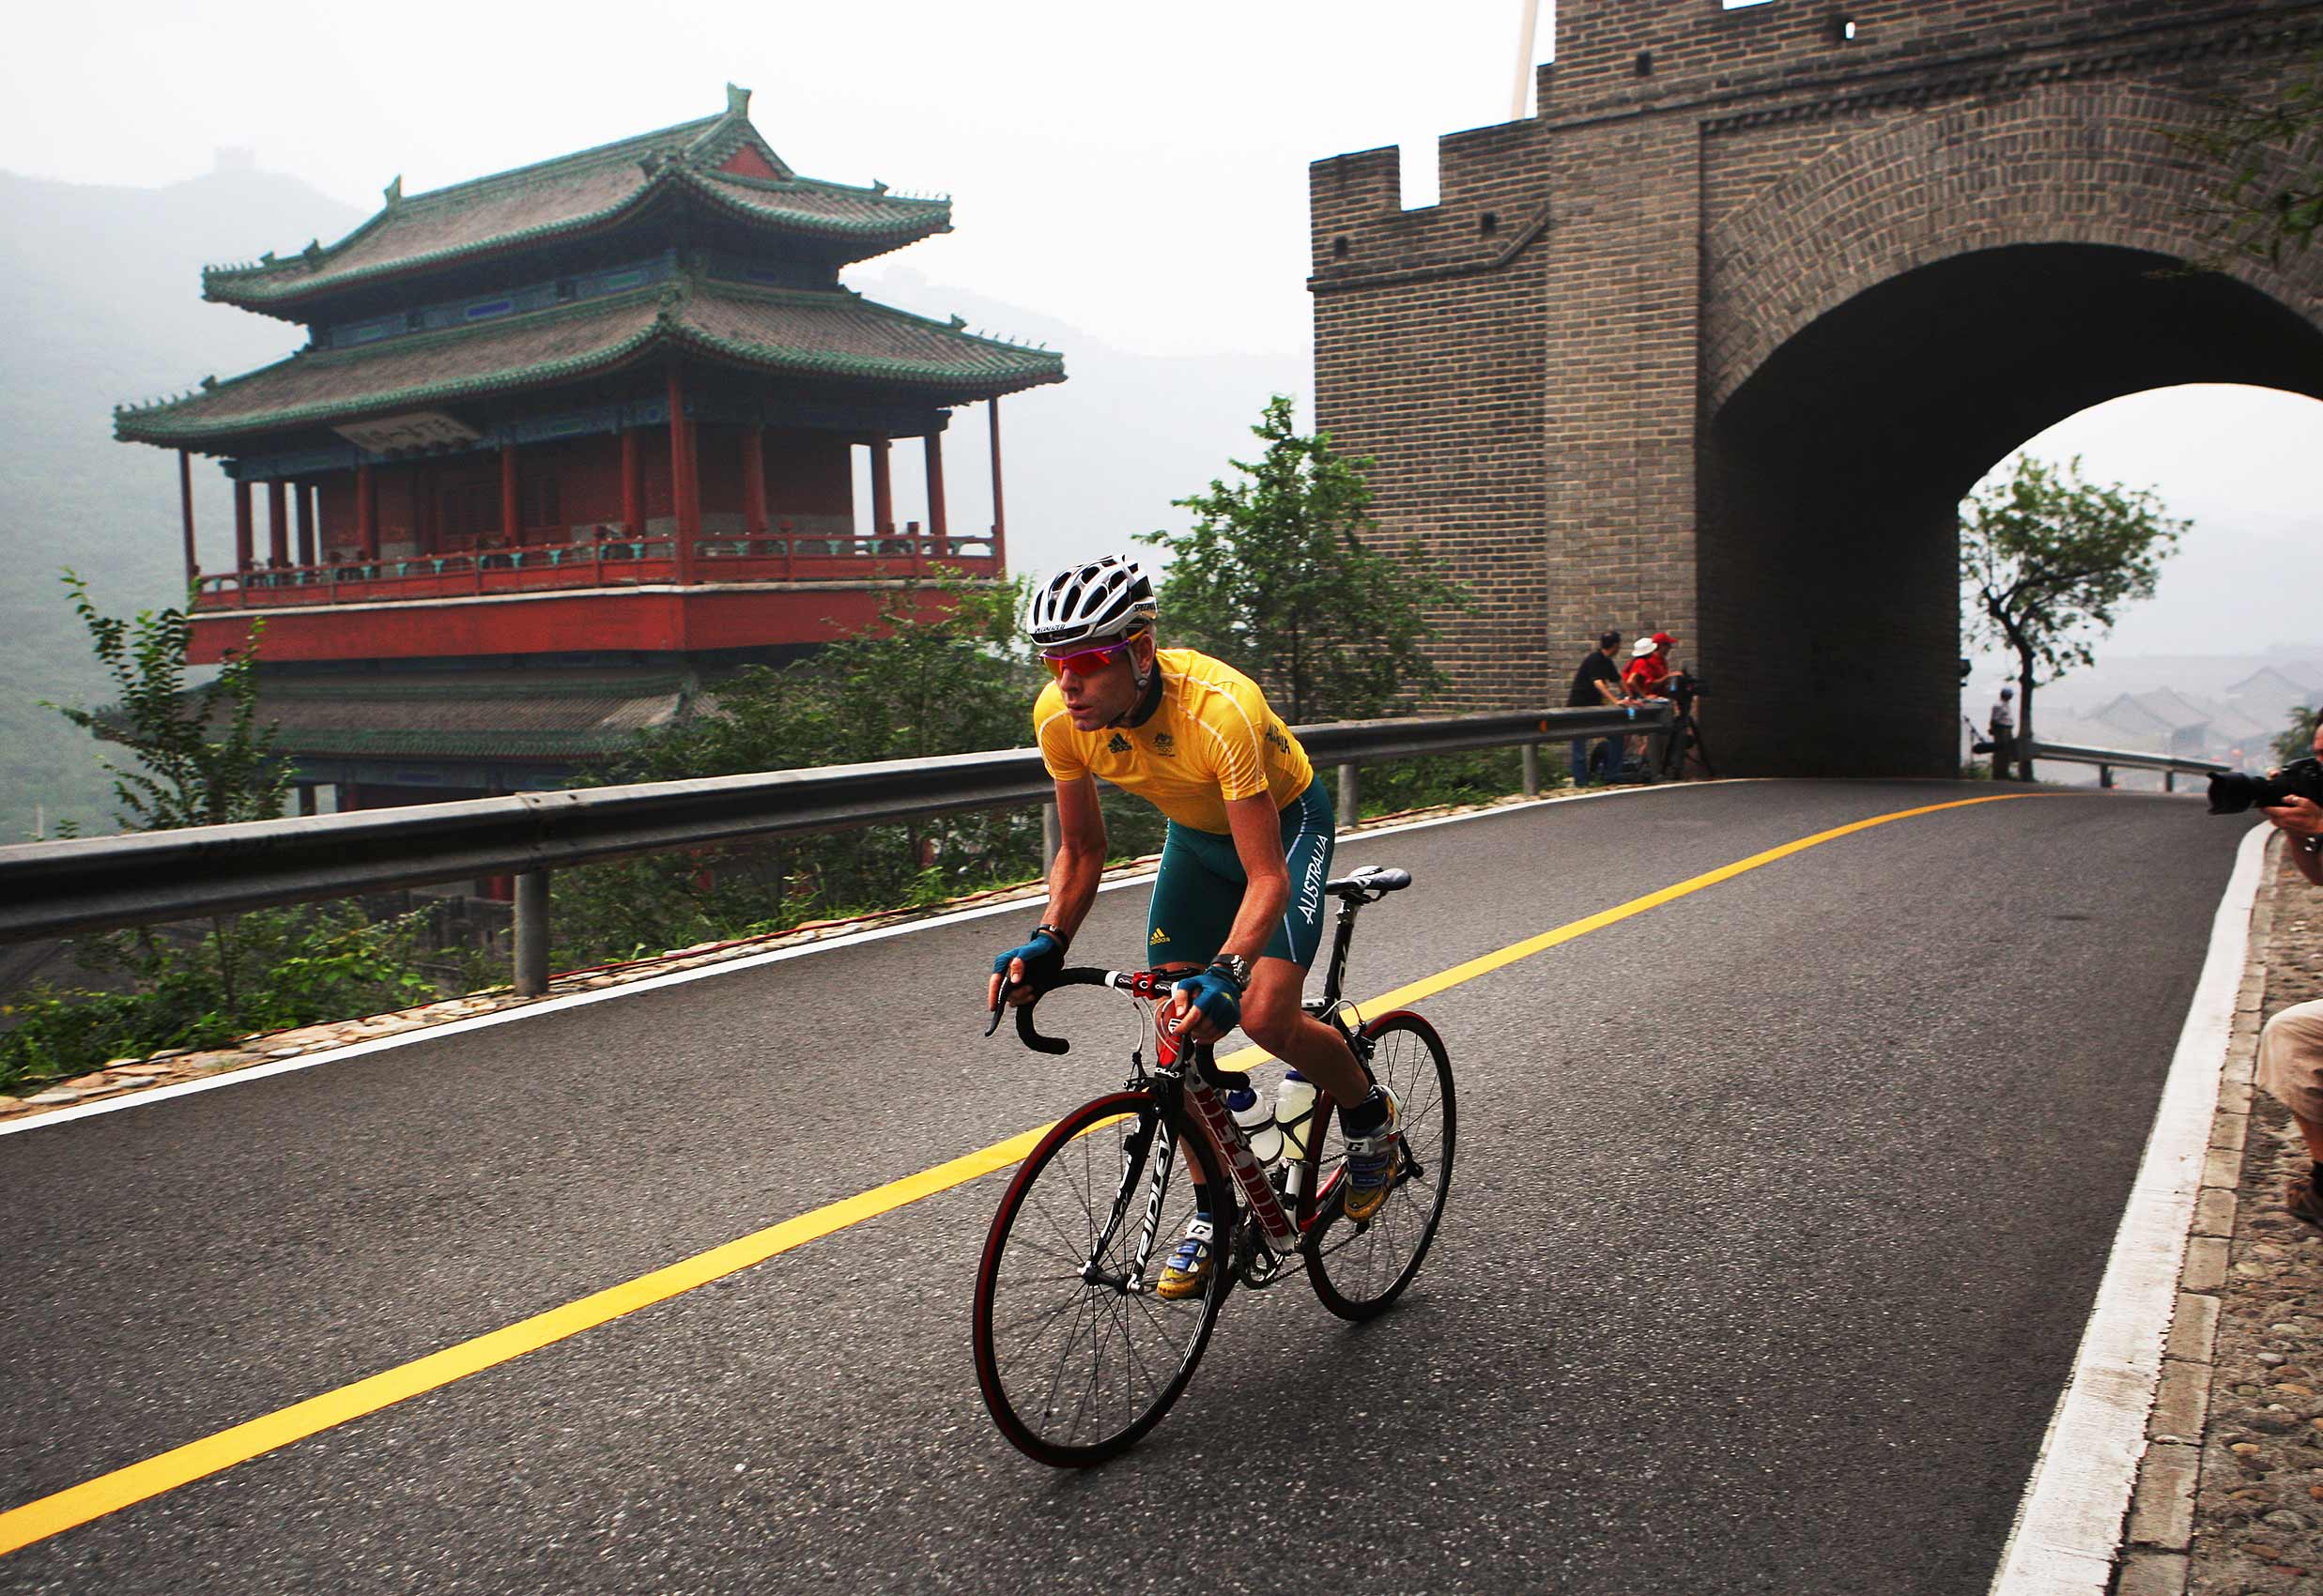   Beijing Olympics 2008. Cadel Evans passes through parts of the Great Wall during the Australian men